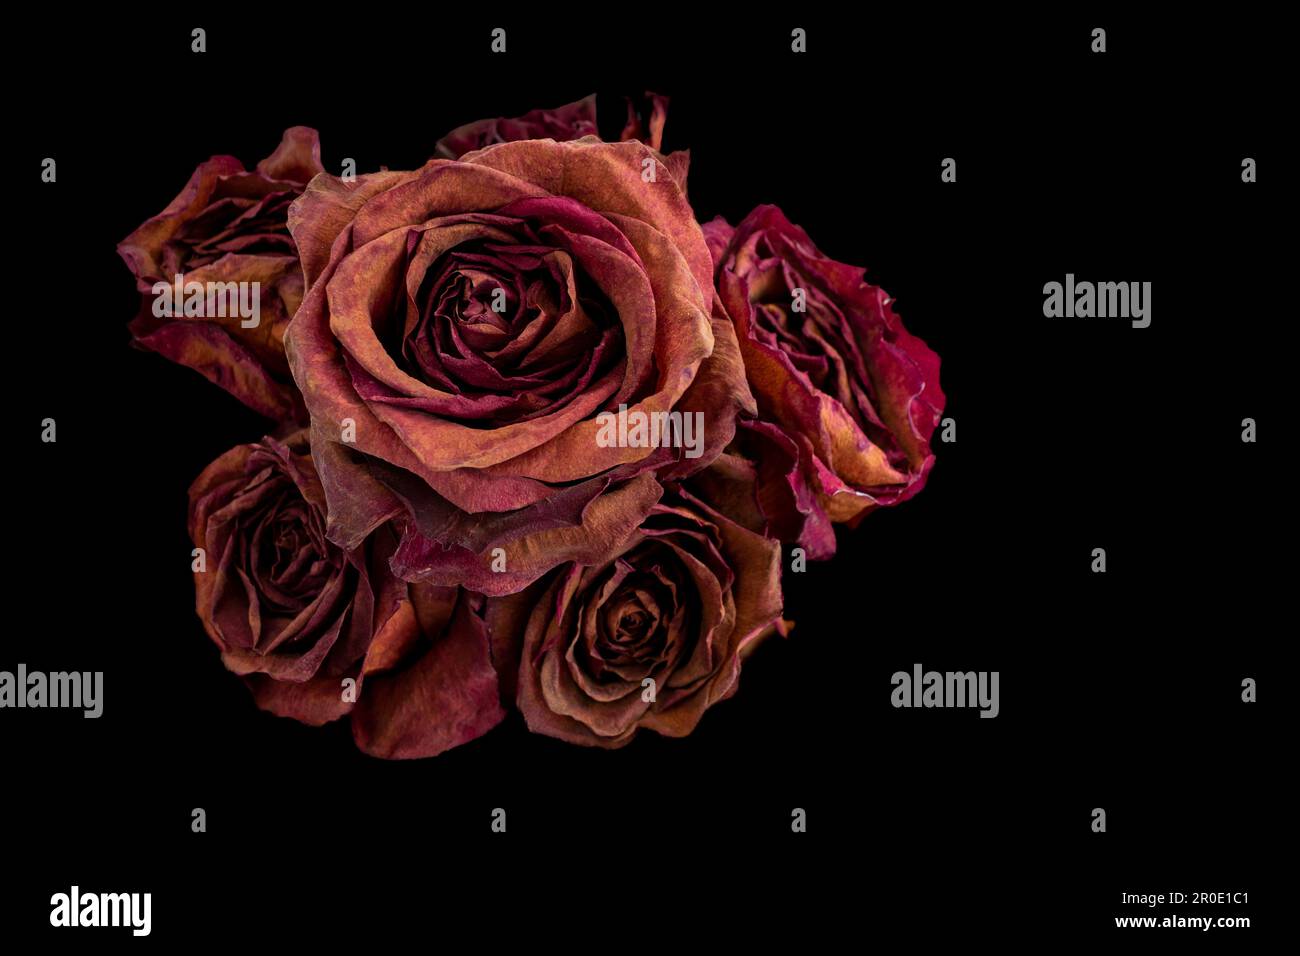 bouquet of dried red roses on black background. Concept of passing of time, aging, beauty of human being is not eternal. Stock Photo